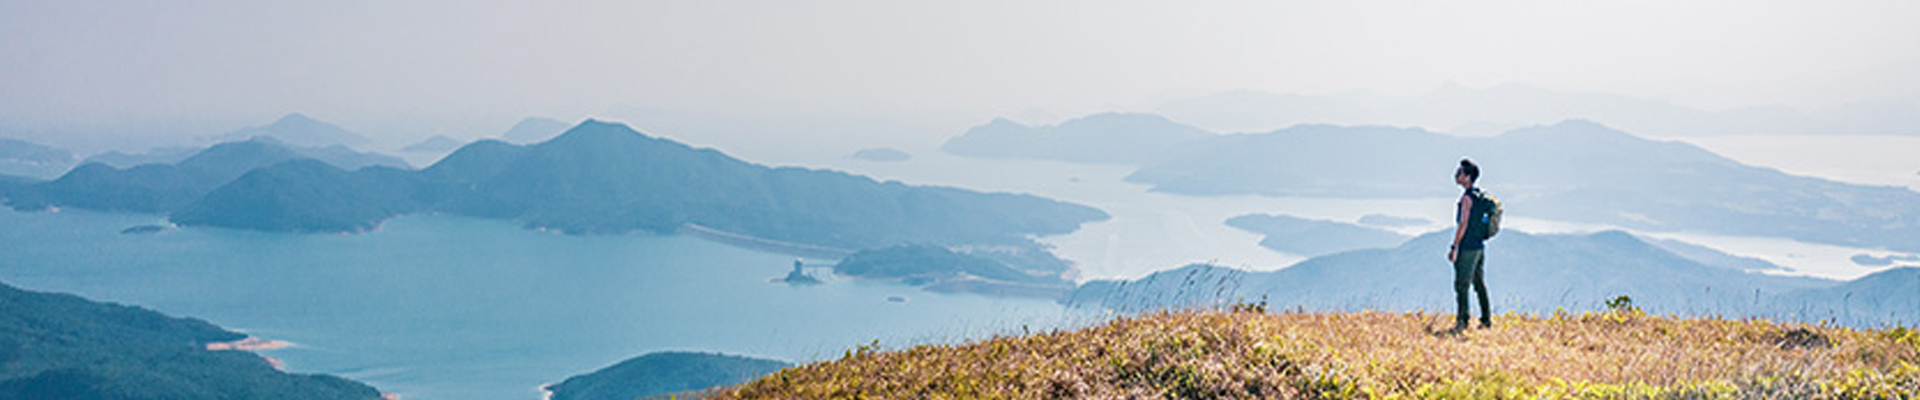 the-best-hiking-trails-for-beginners-in-hong-kong-cigna-smart-health